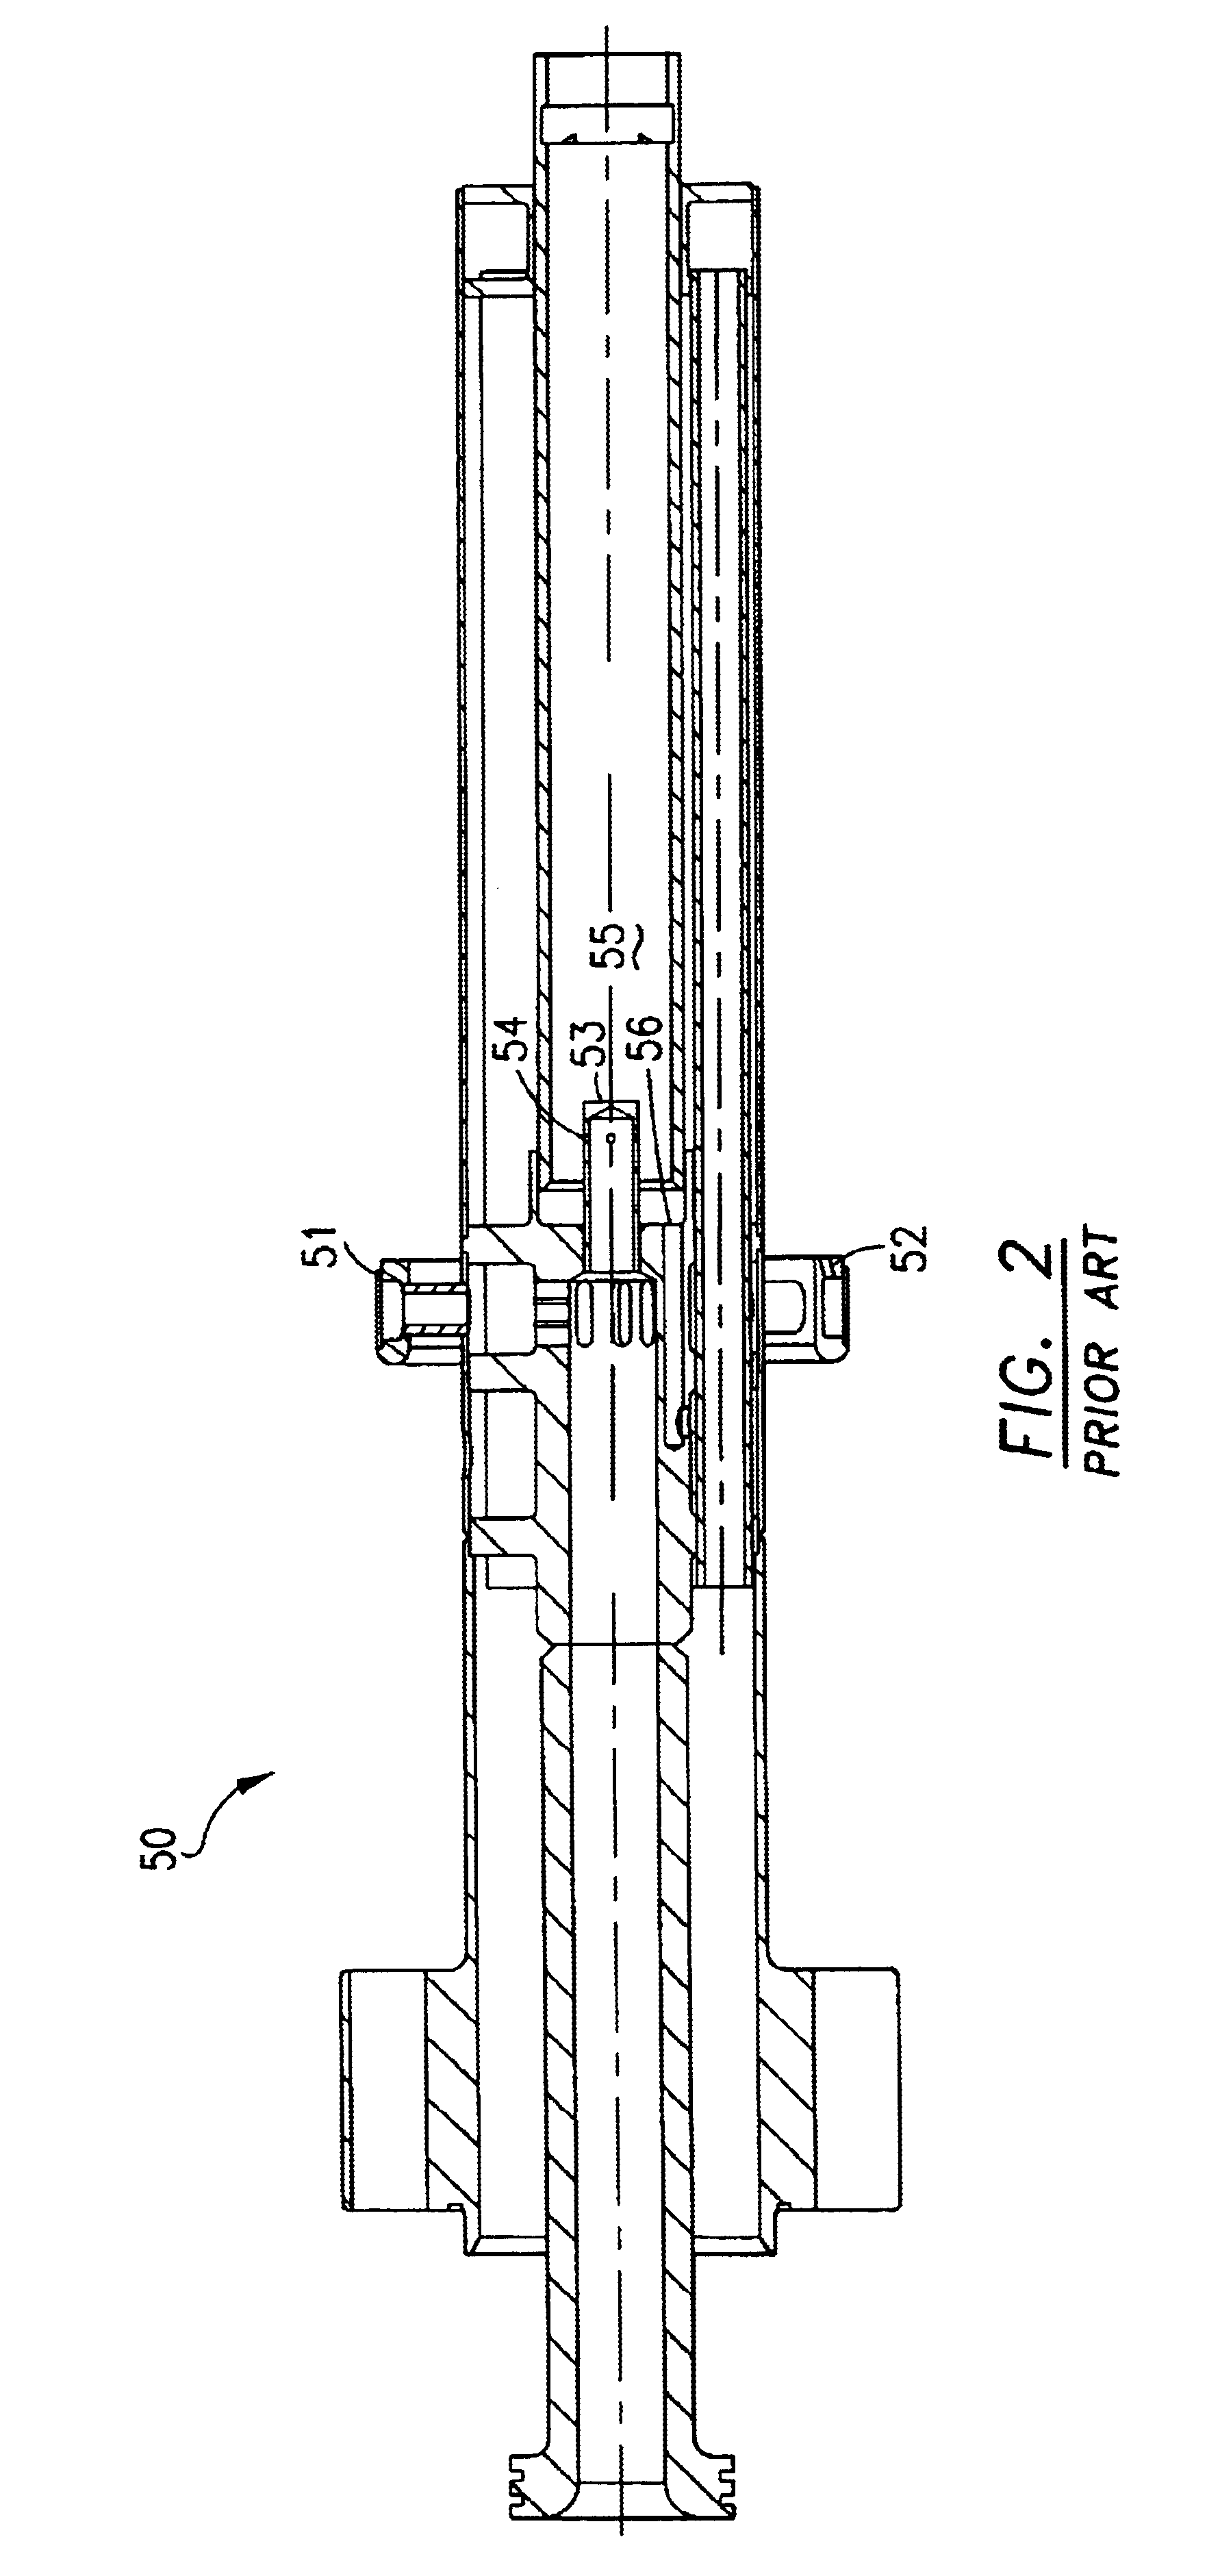 Secondary fuel nozzle with readily customizable pilot fuel flow rate